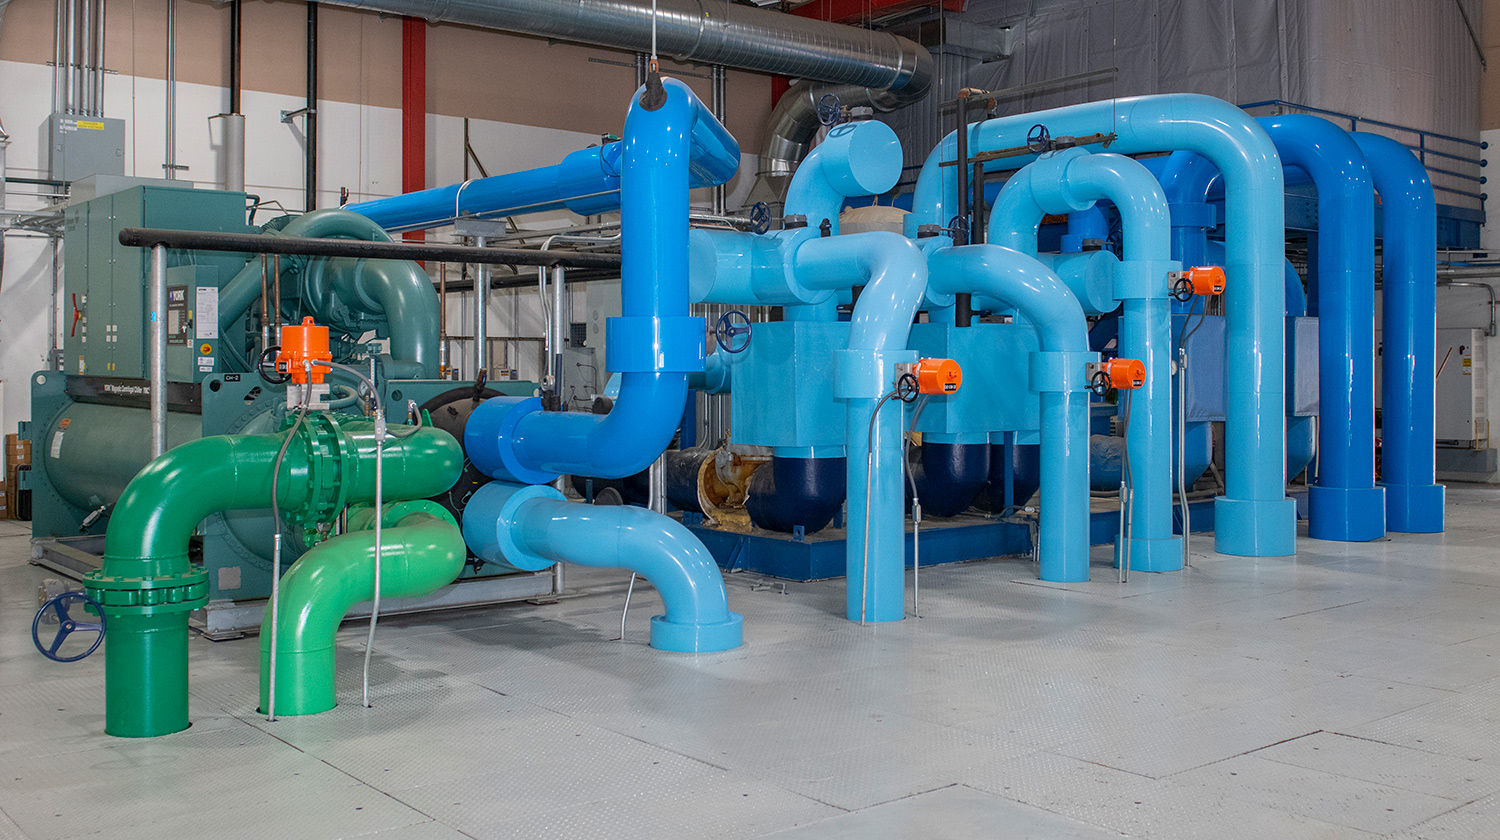 In 2019, the university upgraded its natural gas absorption chillers with electric chillers, and one large natural gas boiler with eight small condensing staged boilers.